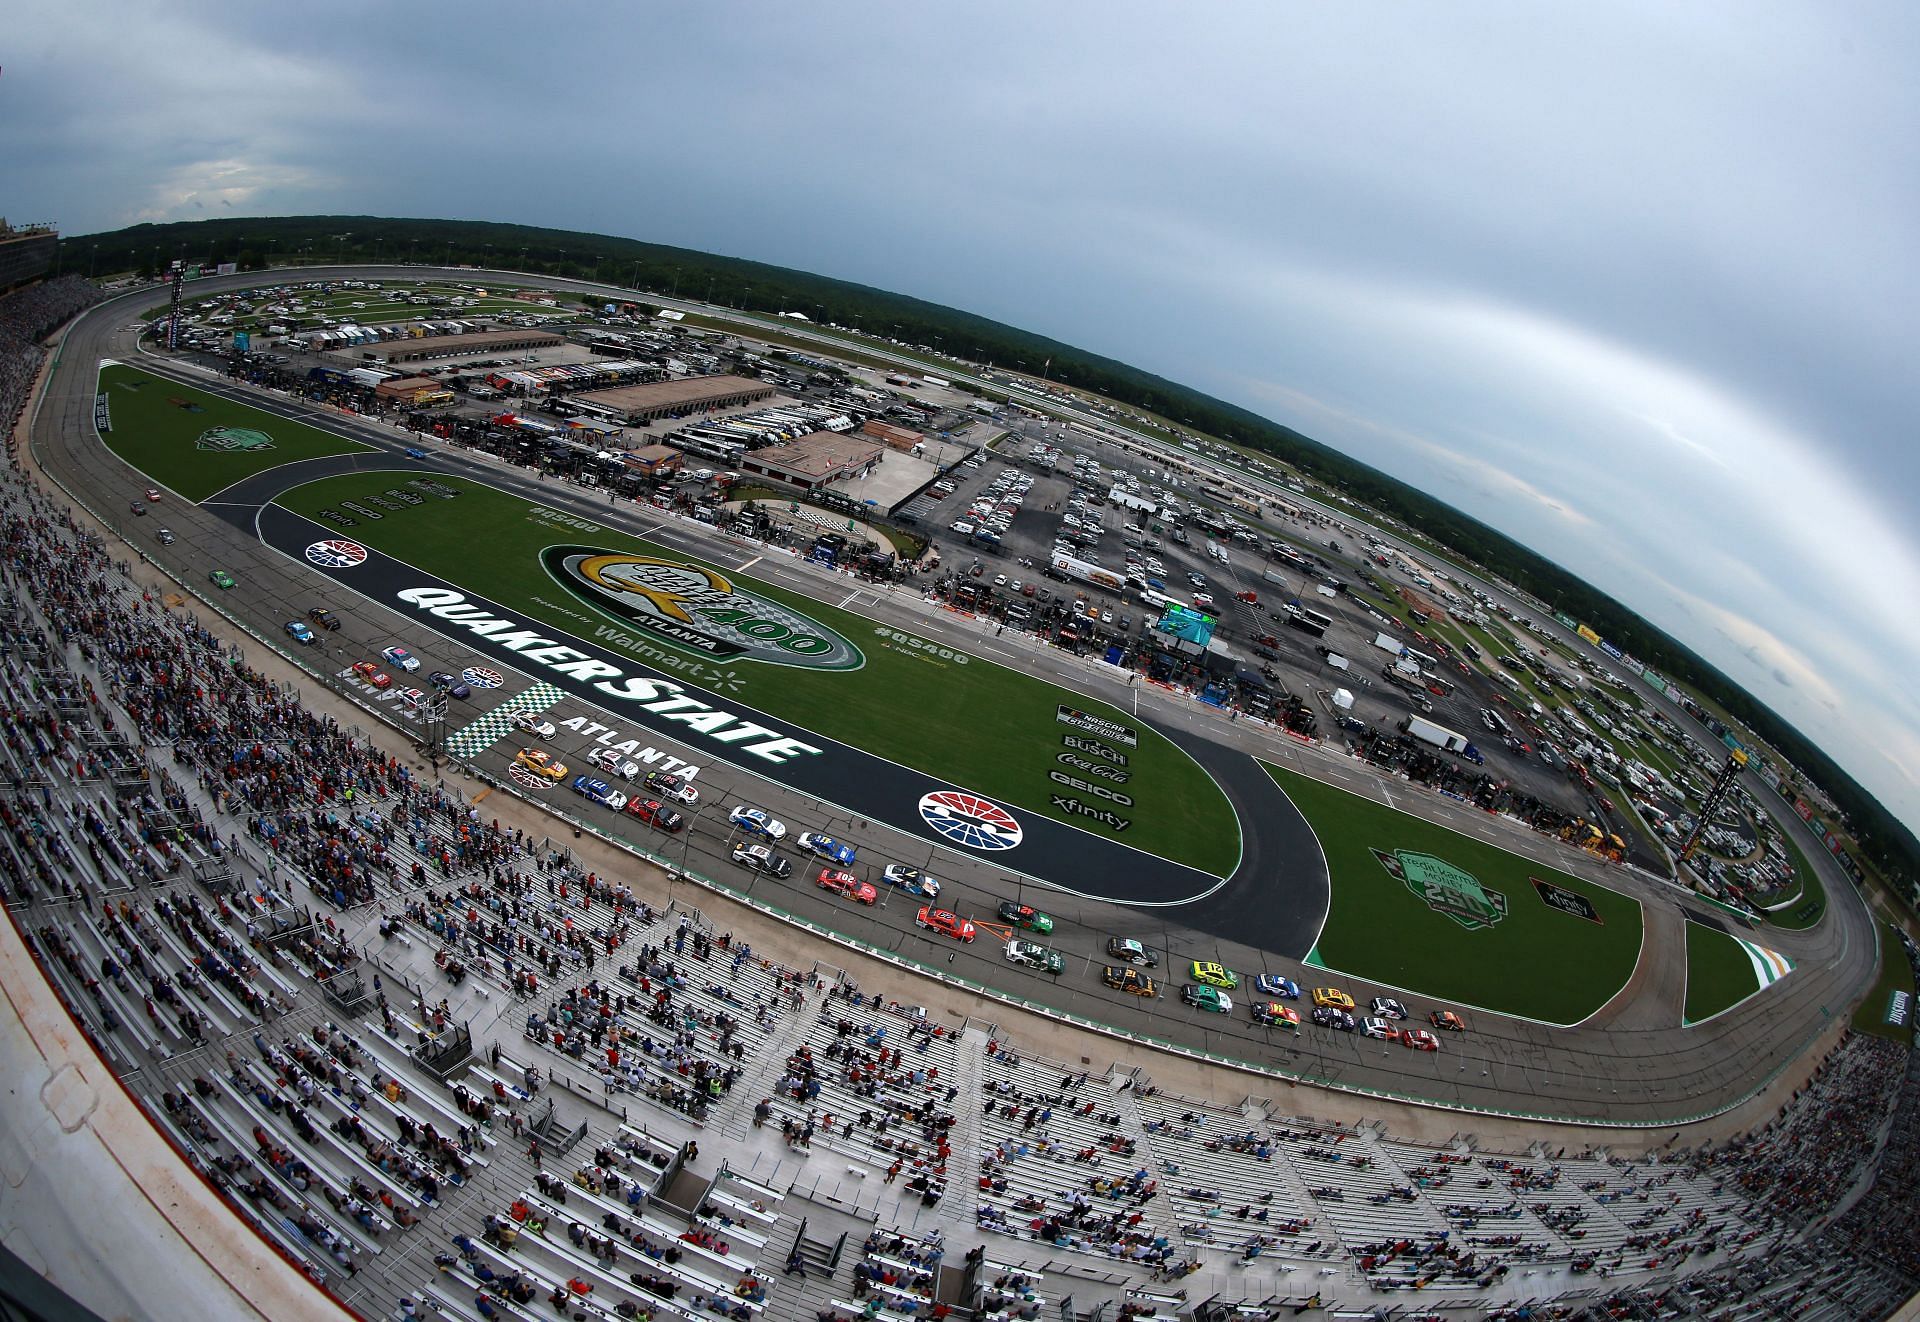 NASCAR 2022 Where to watch Quaker State 400 at Atlanta Motor Speedway race? Time, TV Schedule and Live Stream